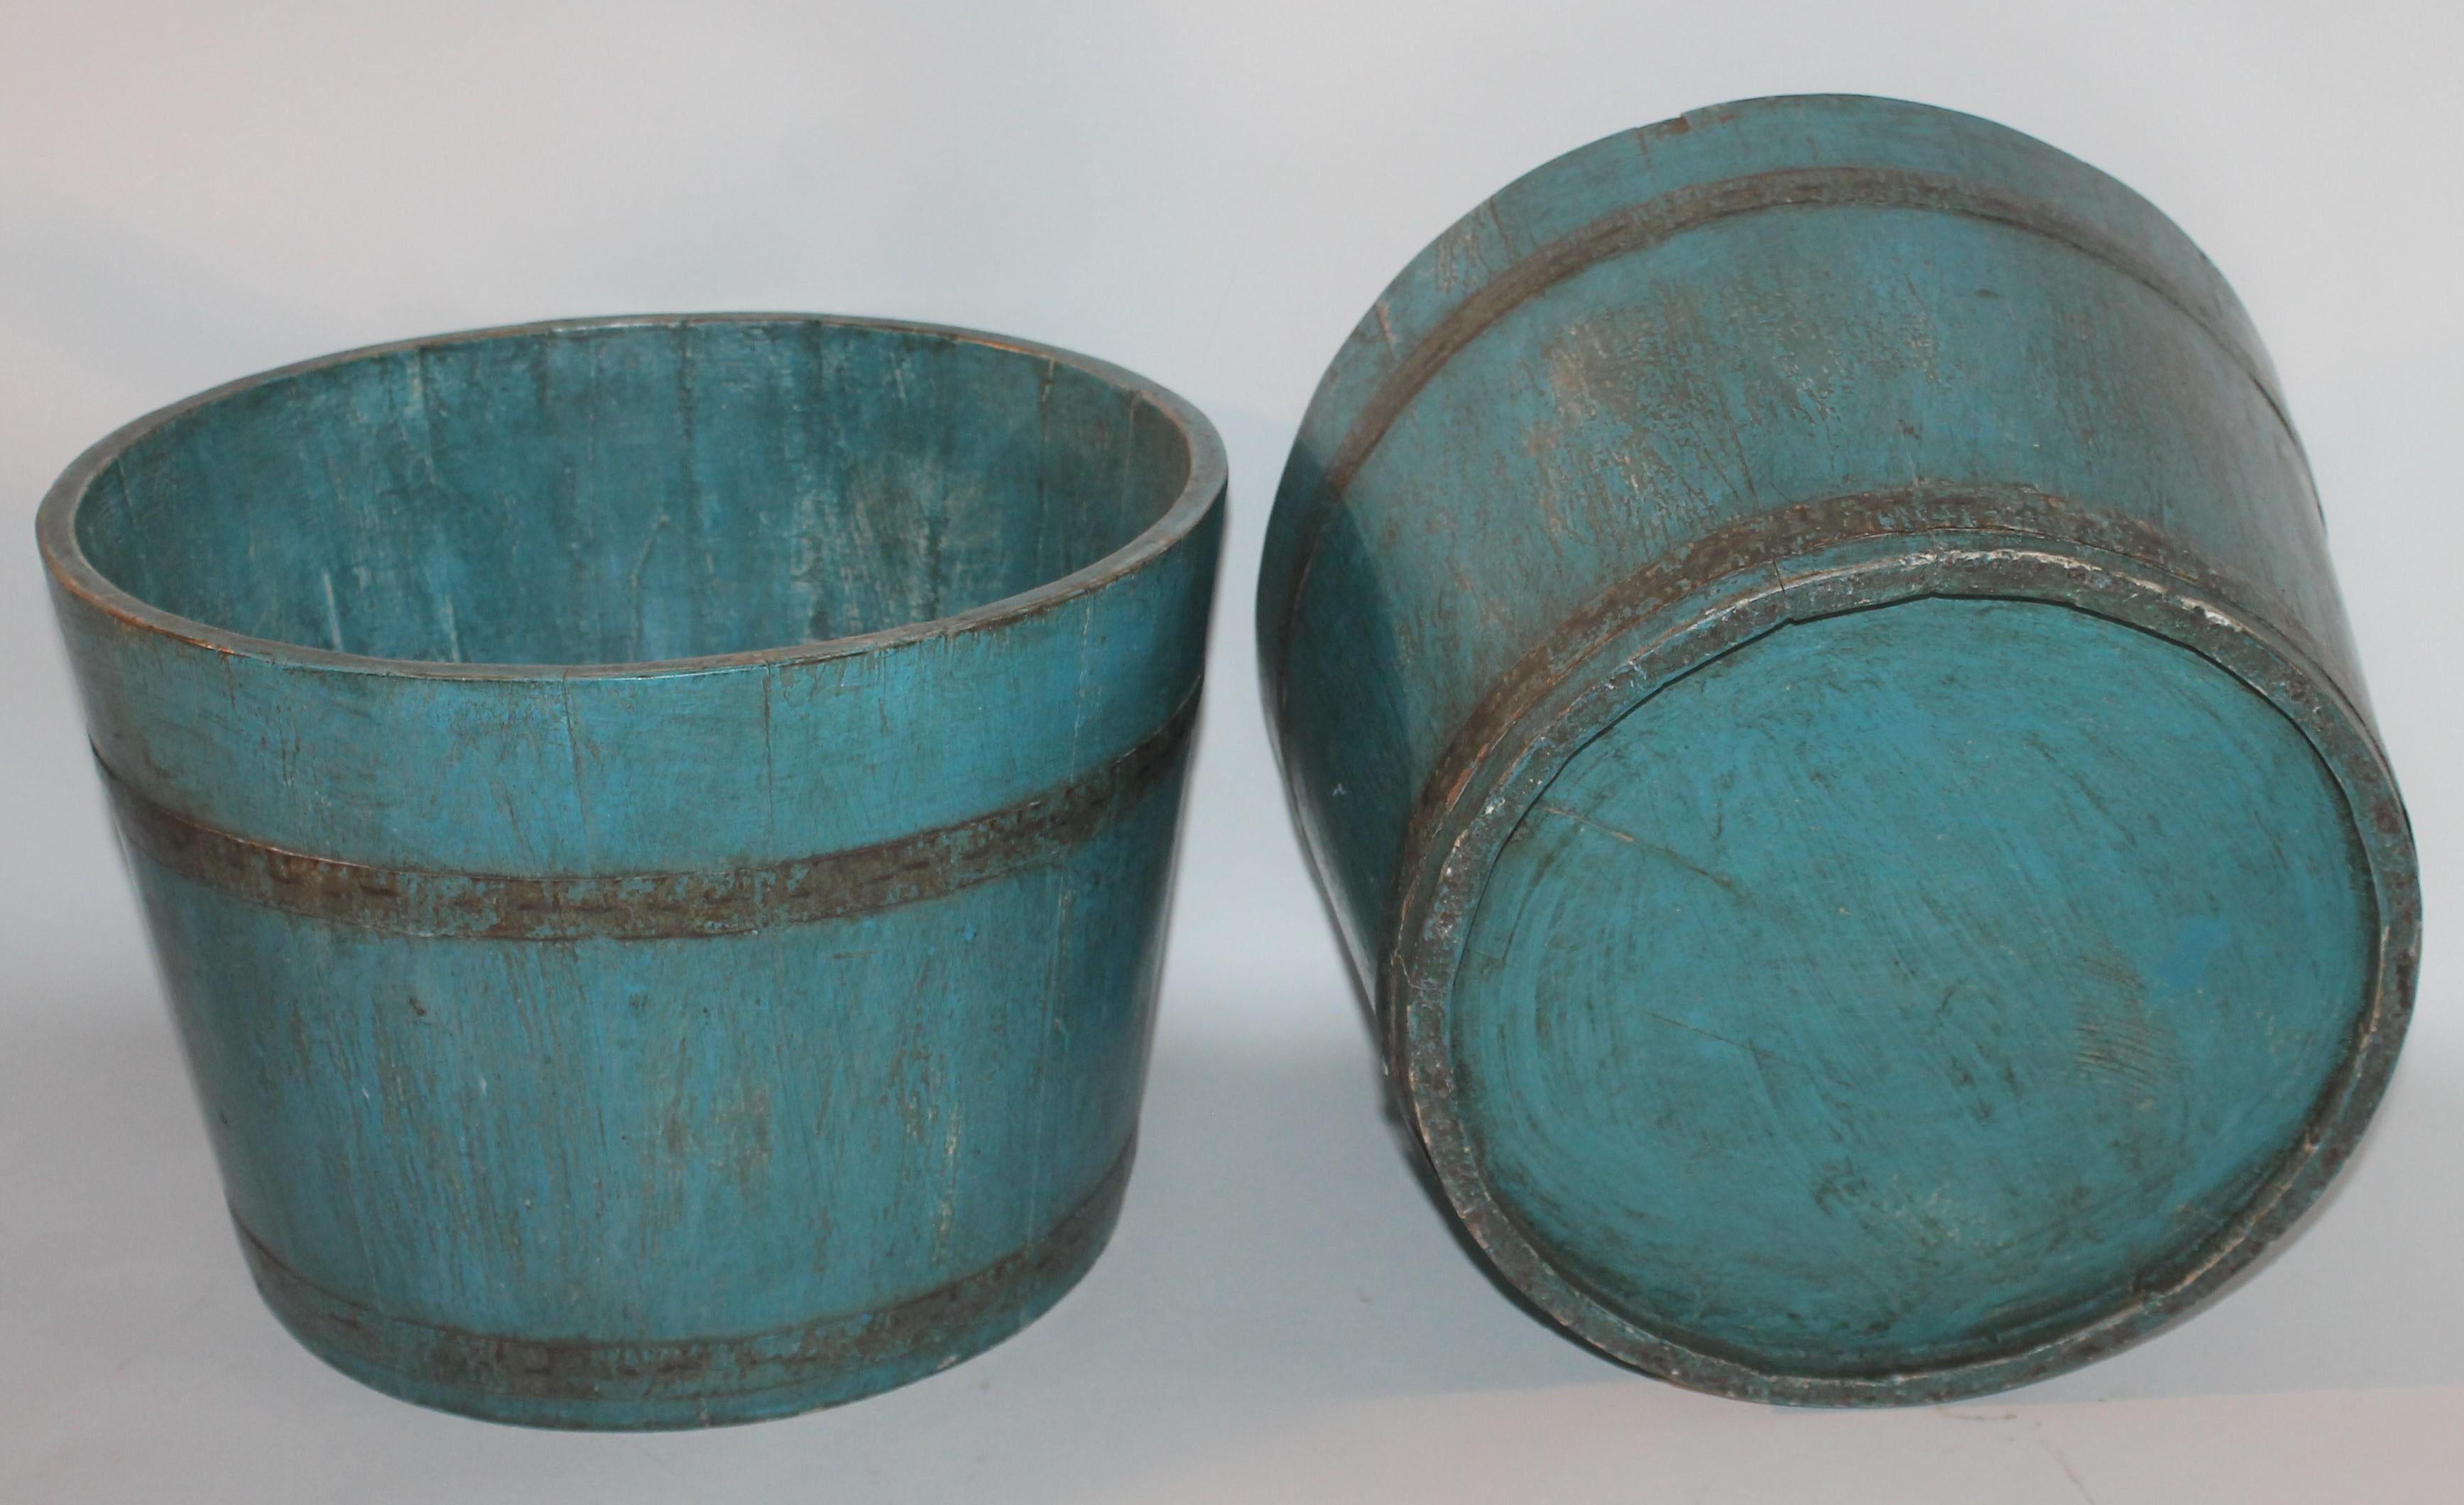 Adirondack 19th Century New England Blue Painted Buckets / Planters, Pair For Sale